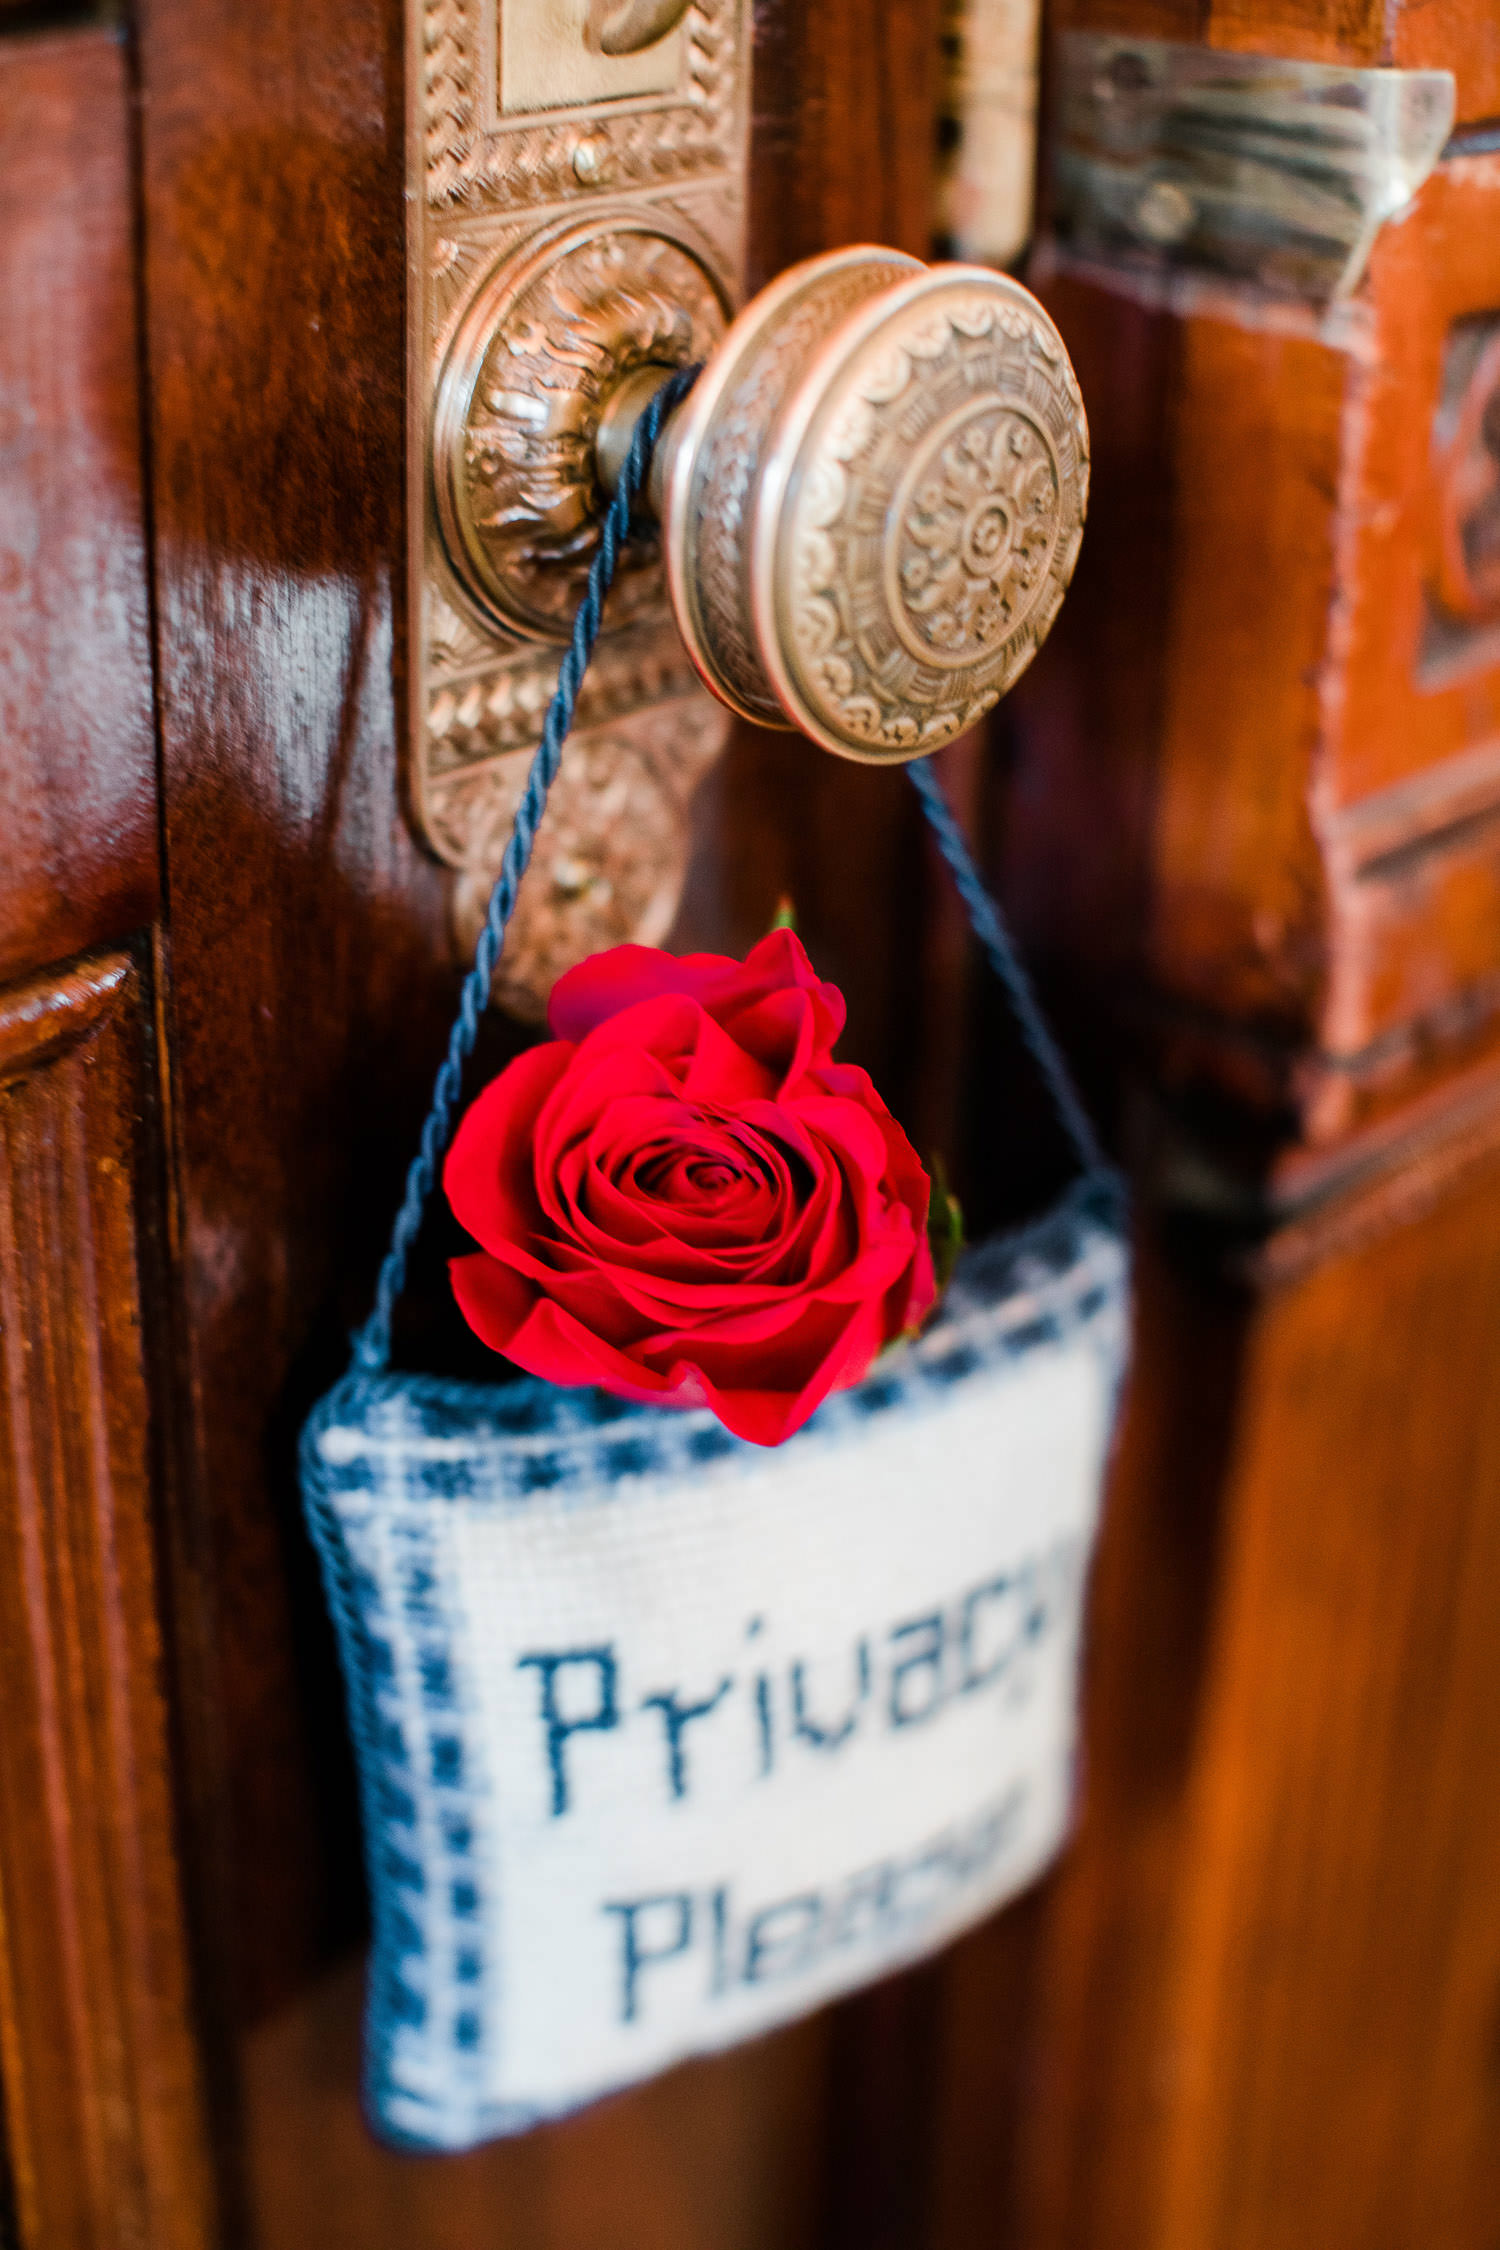 Privacy sign and rose at door knob, Wentworth Mansion